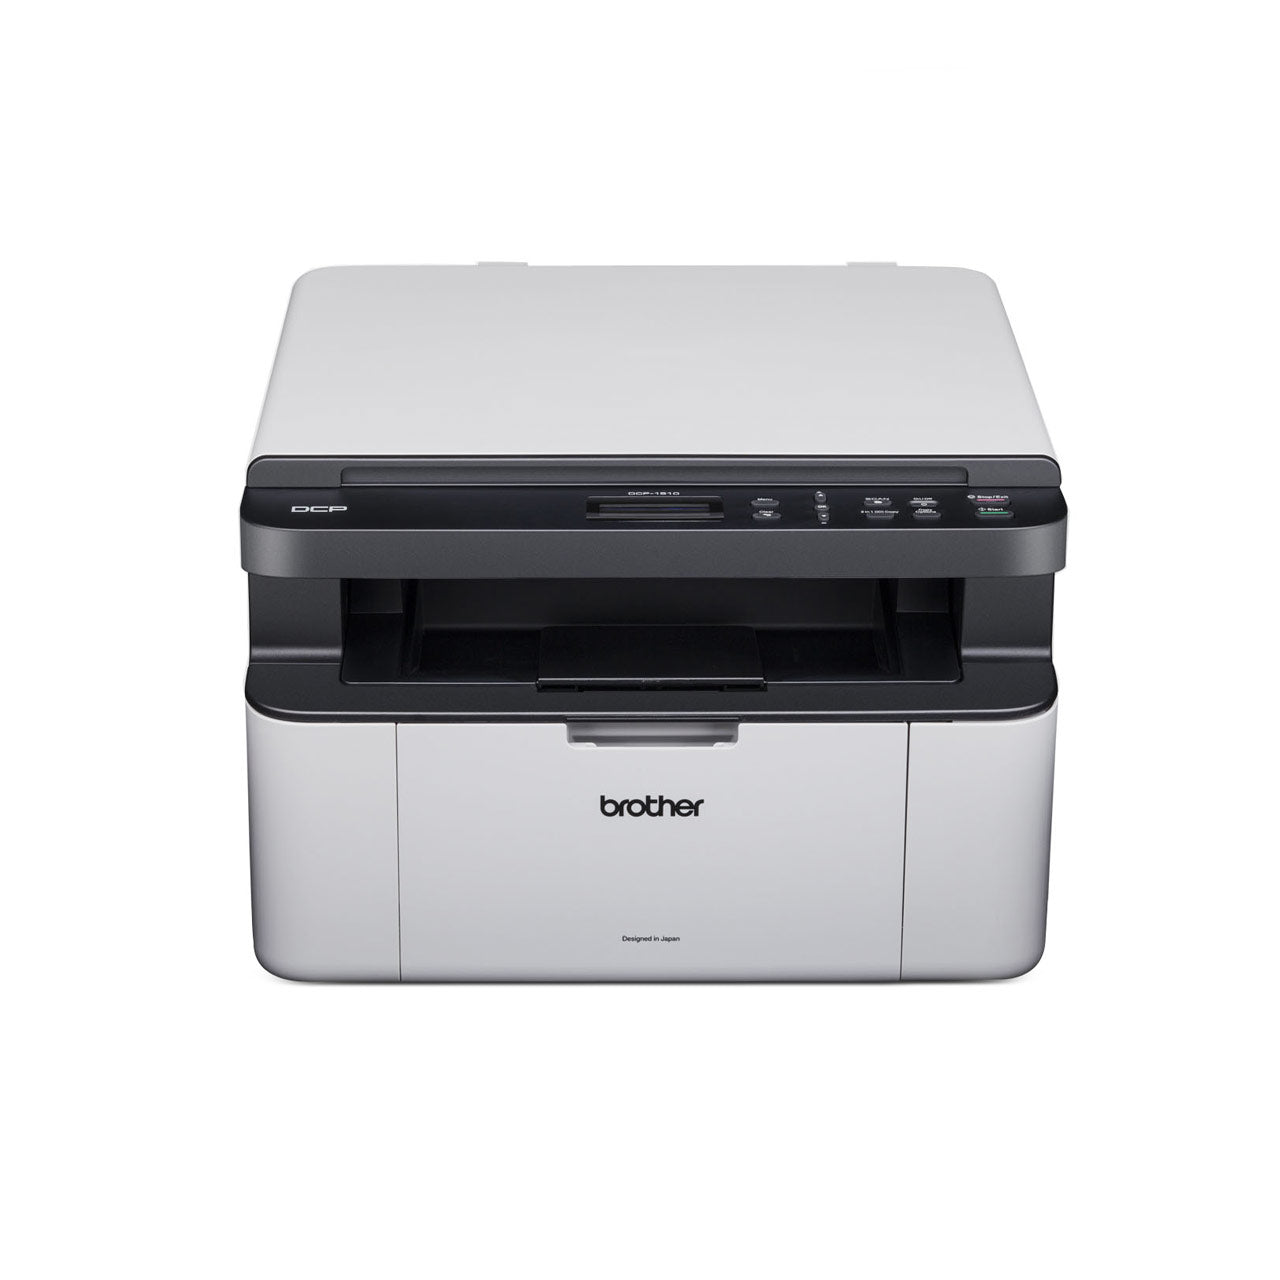 Brother DCP-1610W Printer